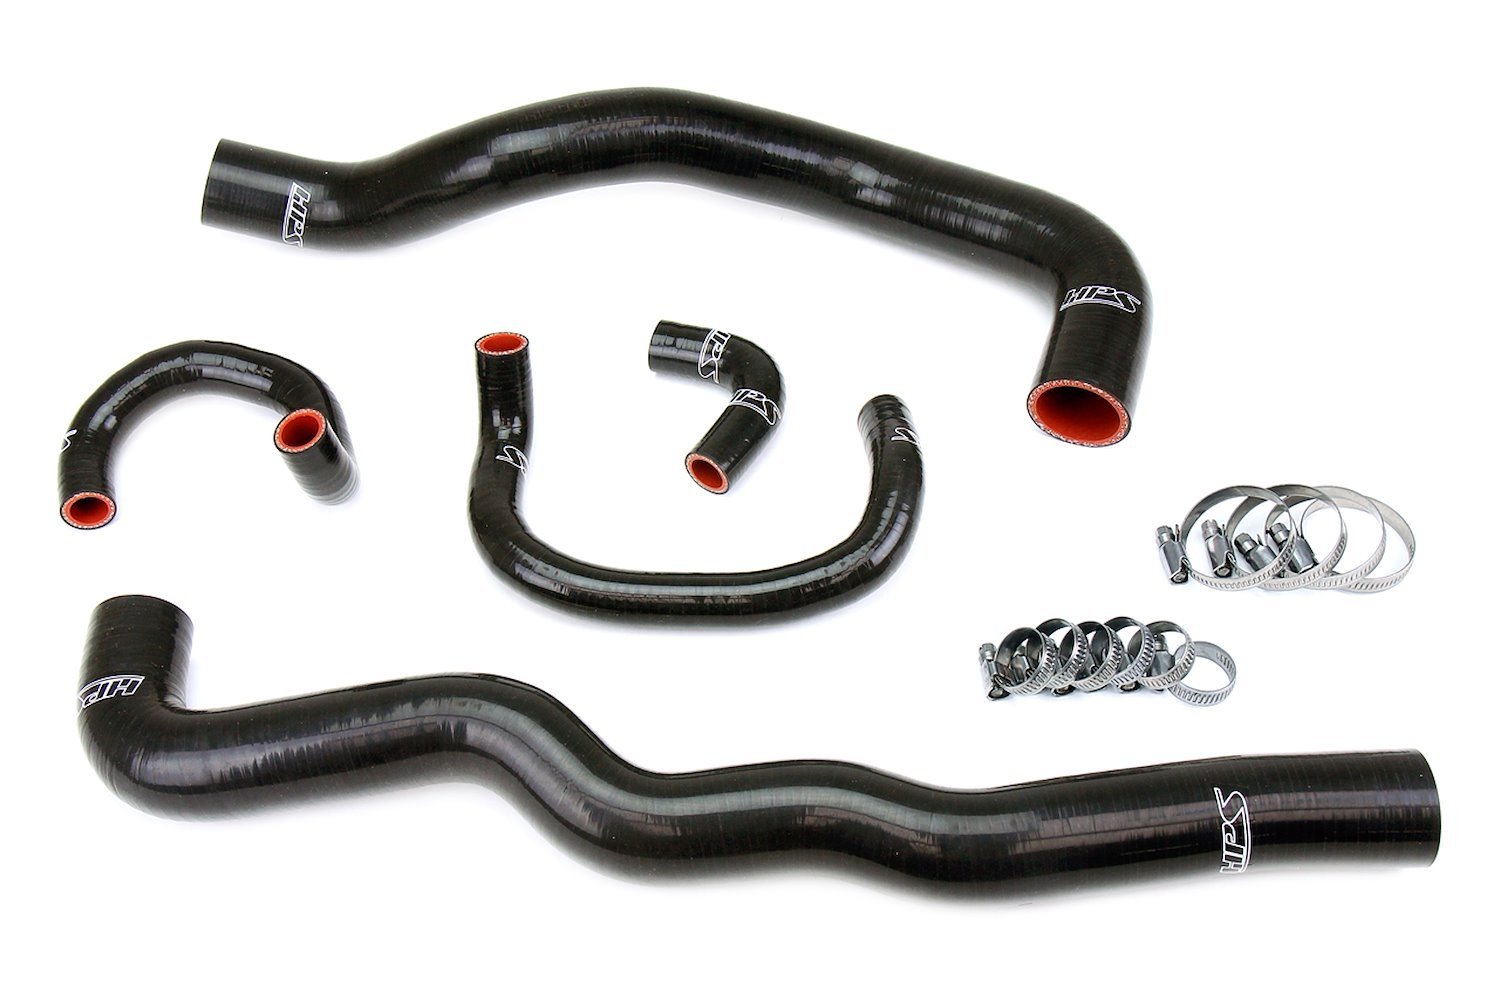 57-2082-BLK Radiator and Heater Hose Kit, 3-Ply Reinforced Silicone, Replaces Rubber Radiator & Heater Hoses